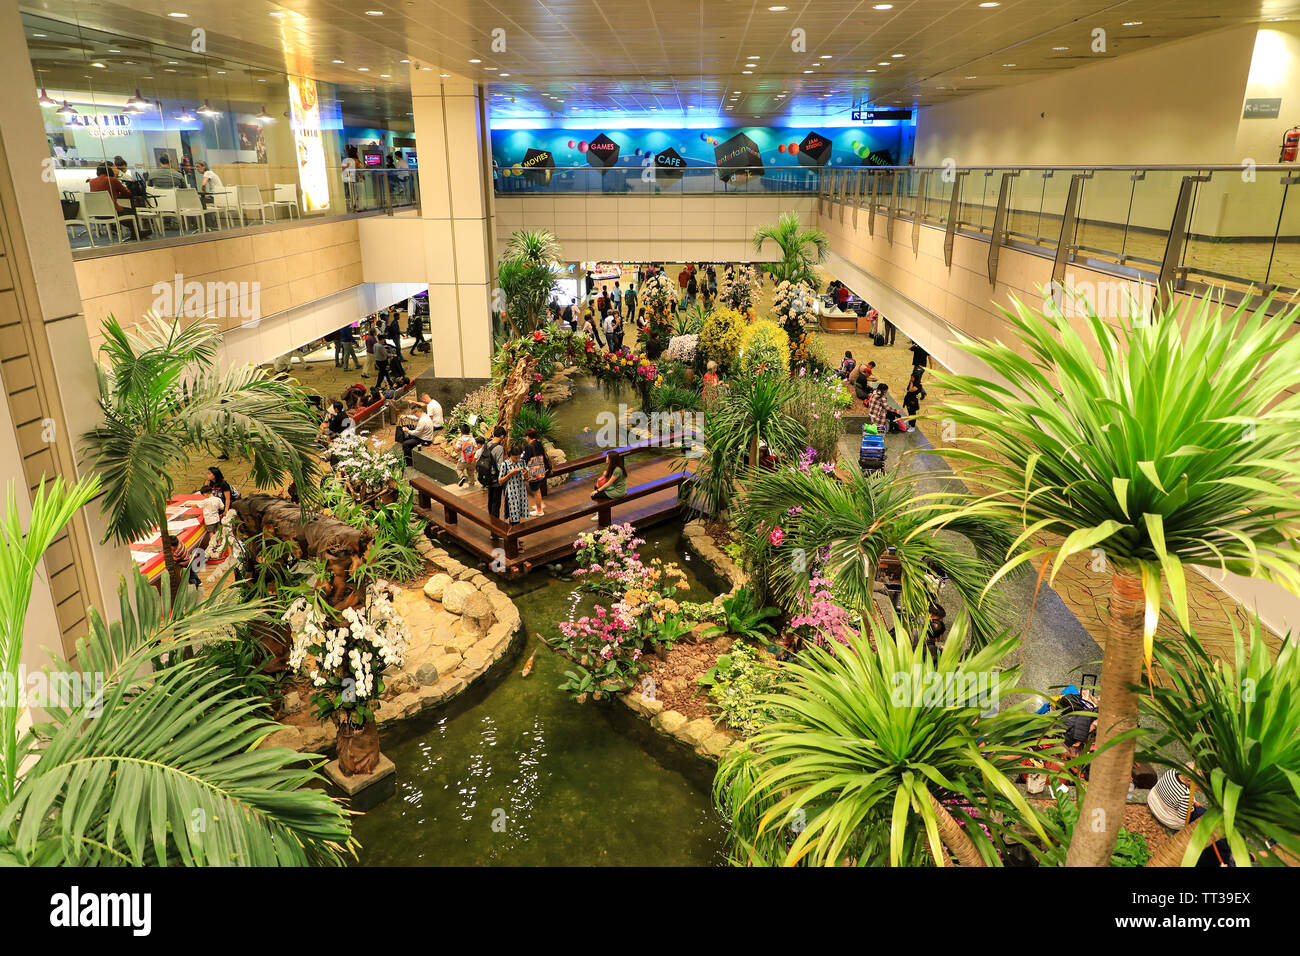 The departure lounge gardens and landscaping inside Singapore Changi International Airport, Singapore, South East Asia Stock Photo